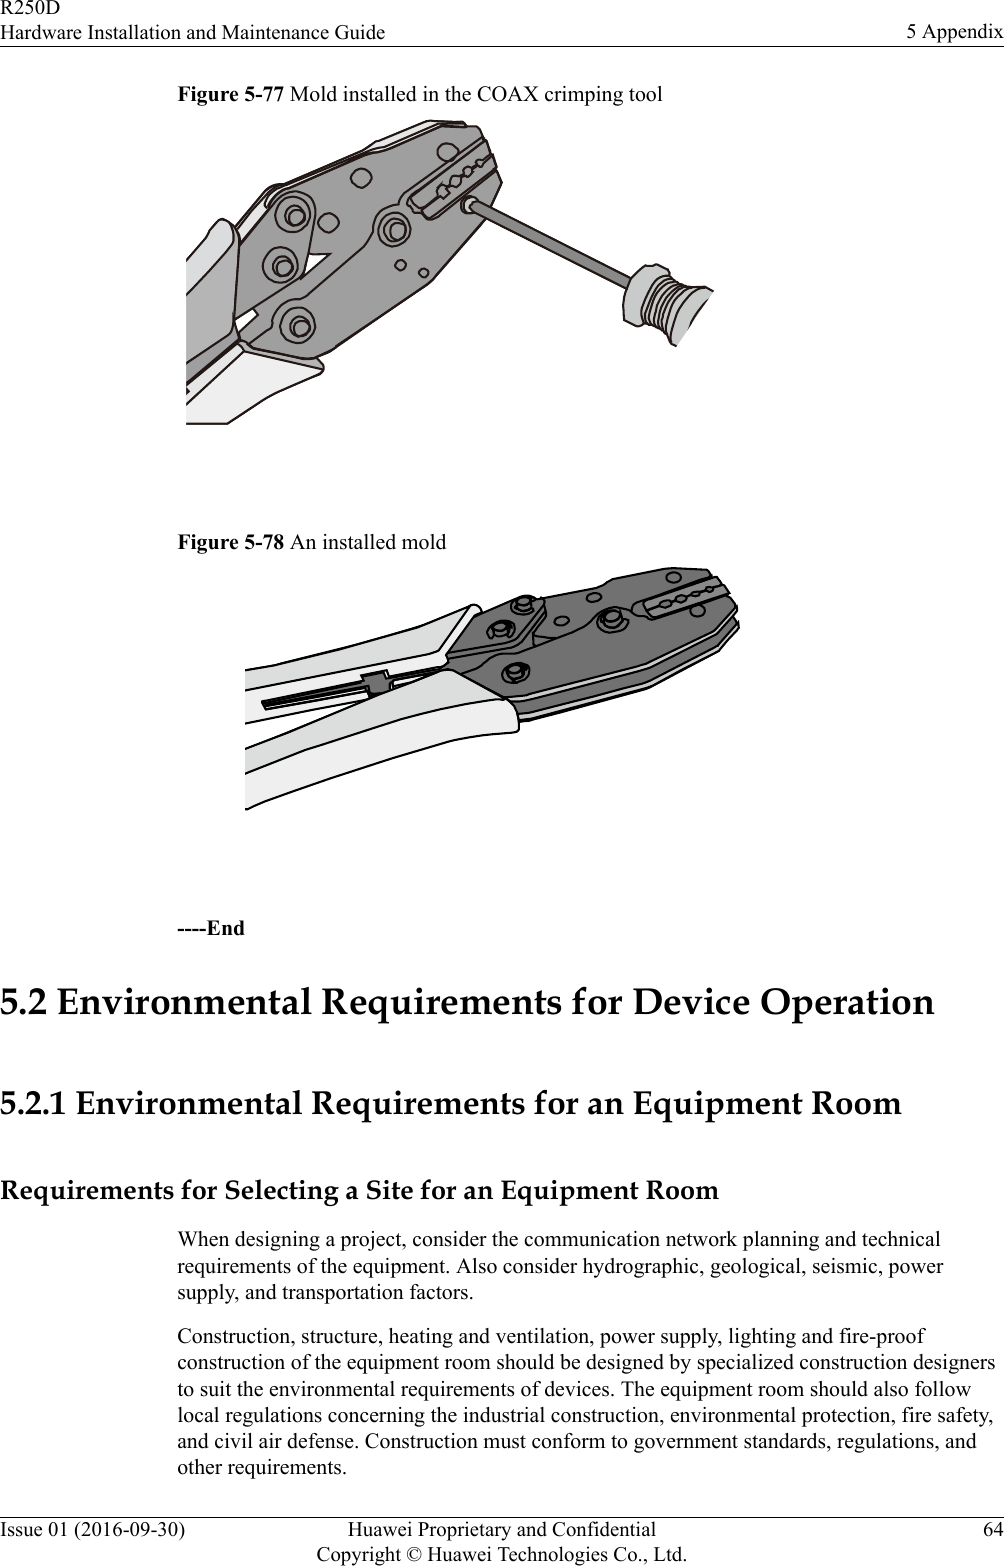 Figure 5-77 Mold installed in the COAX crimping tool Figure 5-78 An installed mold ----End5.2 Environmental Requirements for Device Operation5.2.1 Environmental Requirements for an Equipment RoomRequirements for Selecting a Site for an Equipment RoomWhen designing a project, consider the communication network planning and technicalrequirements of the equipment. Also consider hydrographic, geological, seismic, powersupply, and transportation factors.Construction, structure, heating and ventilation, power supply, lighting and fire-proofconstruction of the equipment room should be designed by specialized construction designersto suit the environmental requirements of devices. The equipment room should also followlocal regulations concerning the industrial construction, environmental protection, fire safety,and civil air defense. Construction must conform to government standards, regulations, andother requirements.R250DHardware Installation and Maintenance Guide 5 AppendixIssue 01 (2016-09-30) Huawei Proprietary and ConfidentialCopyright © Huawei Technologies Co., Ltd.64